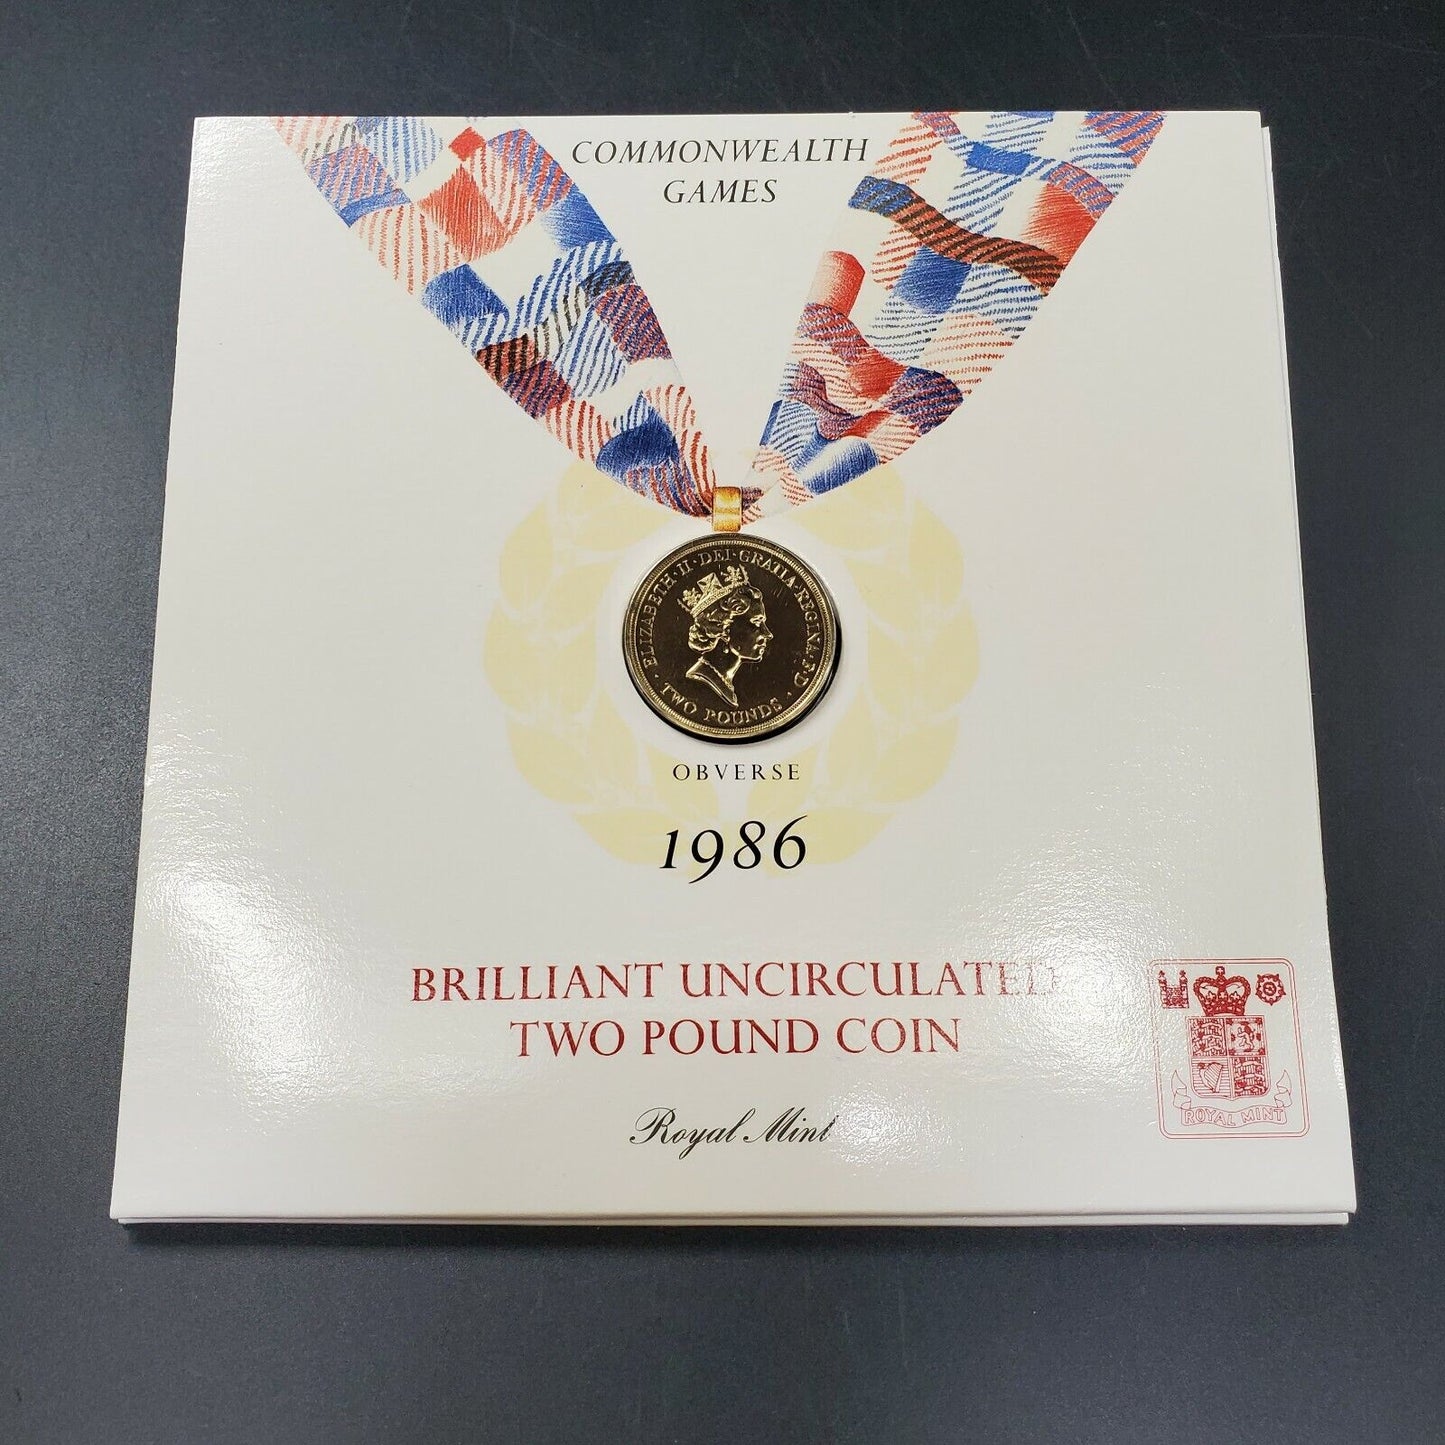 Uncirculated 1986 United Kingdom Commonwealth Games 2 Pounds Commemorative Coin